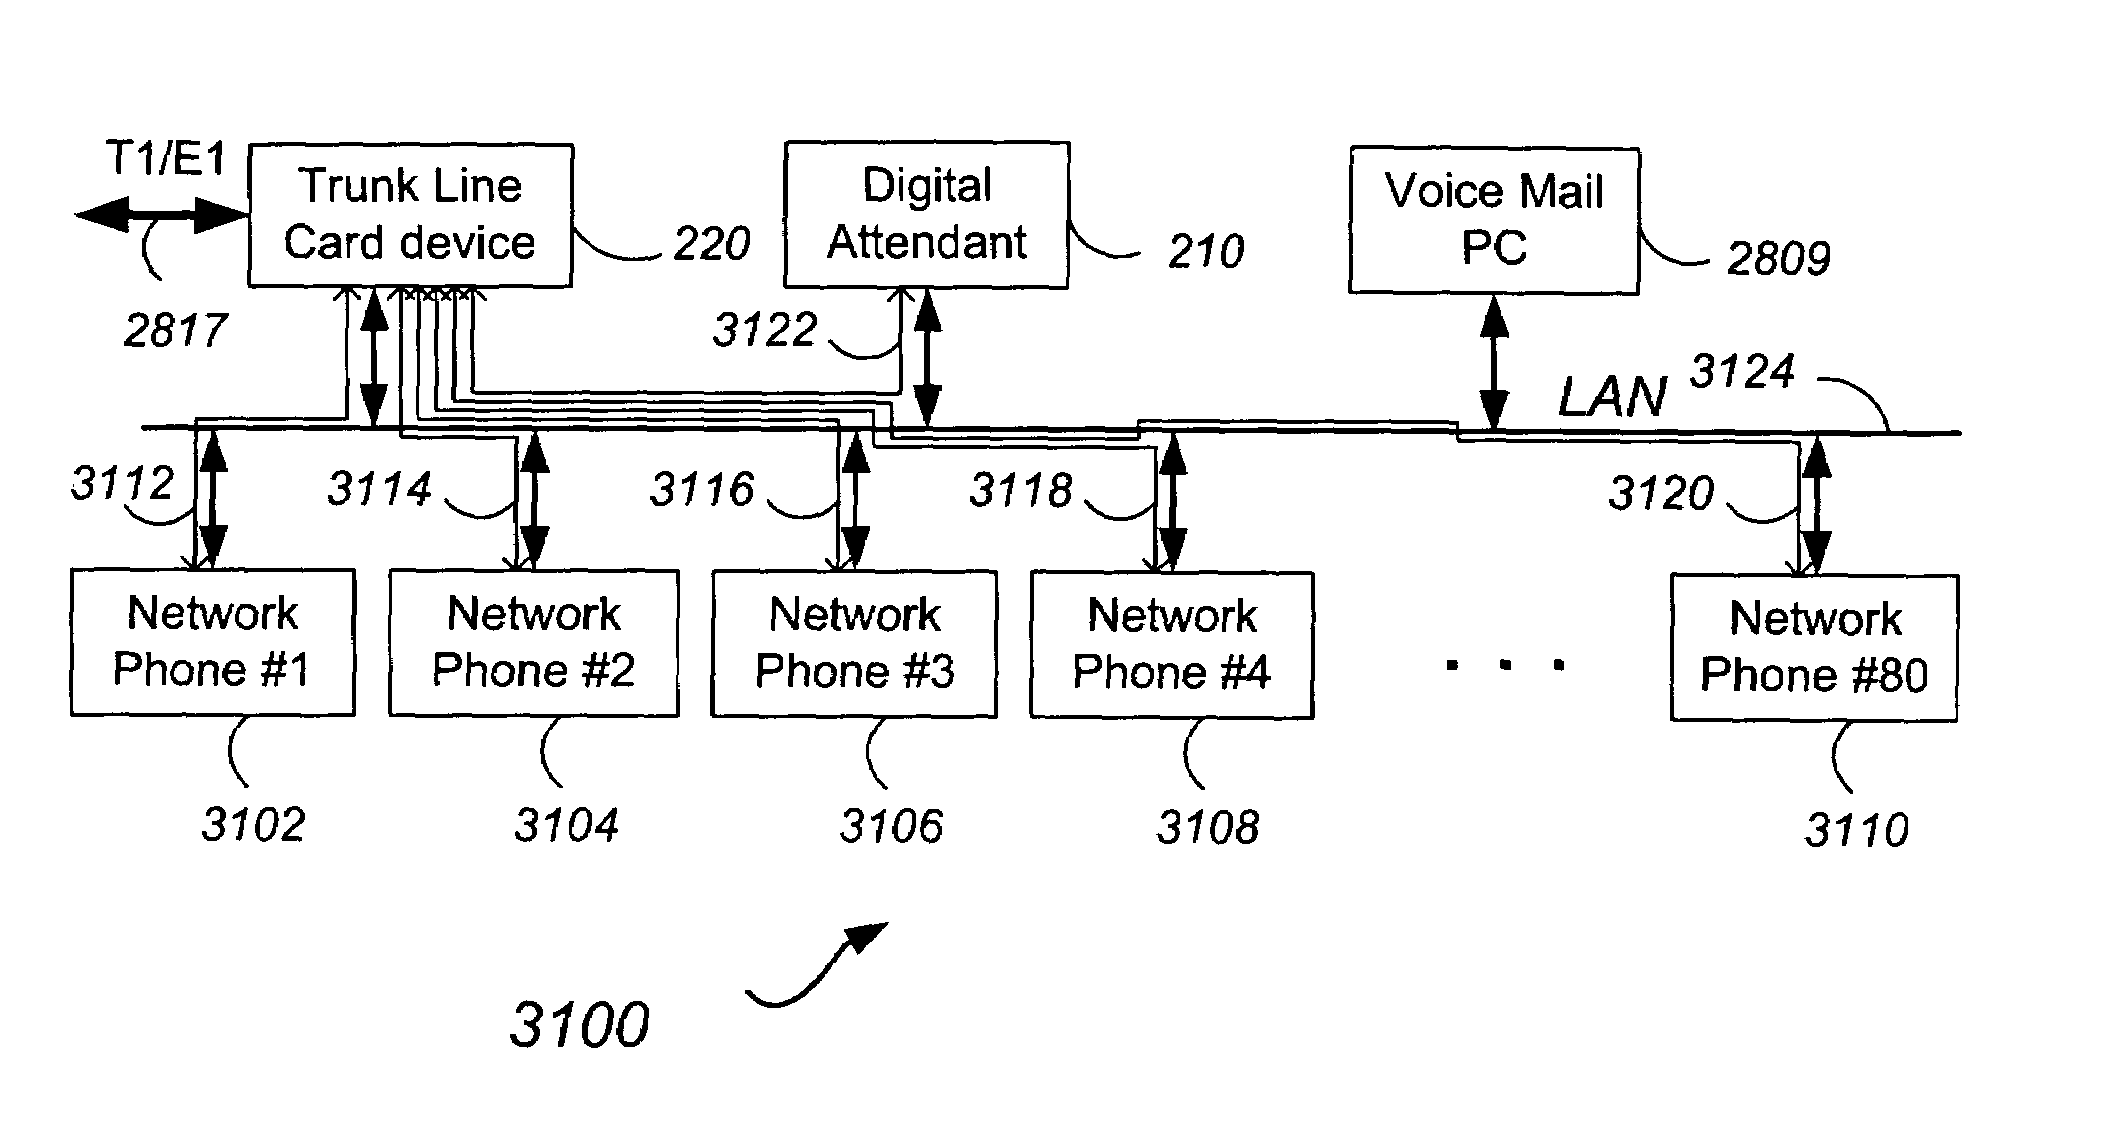 Network telephone system and methods therefor